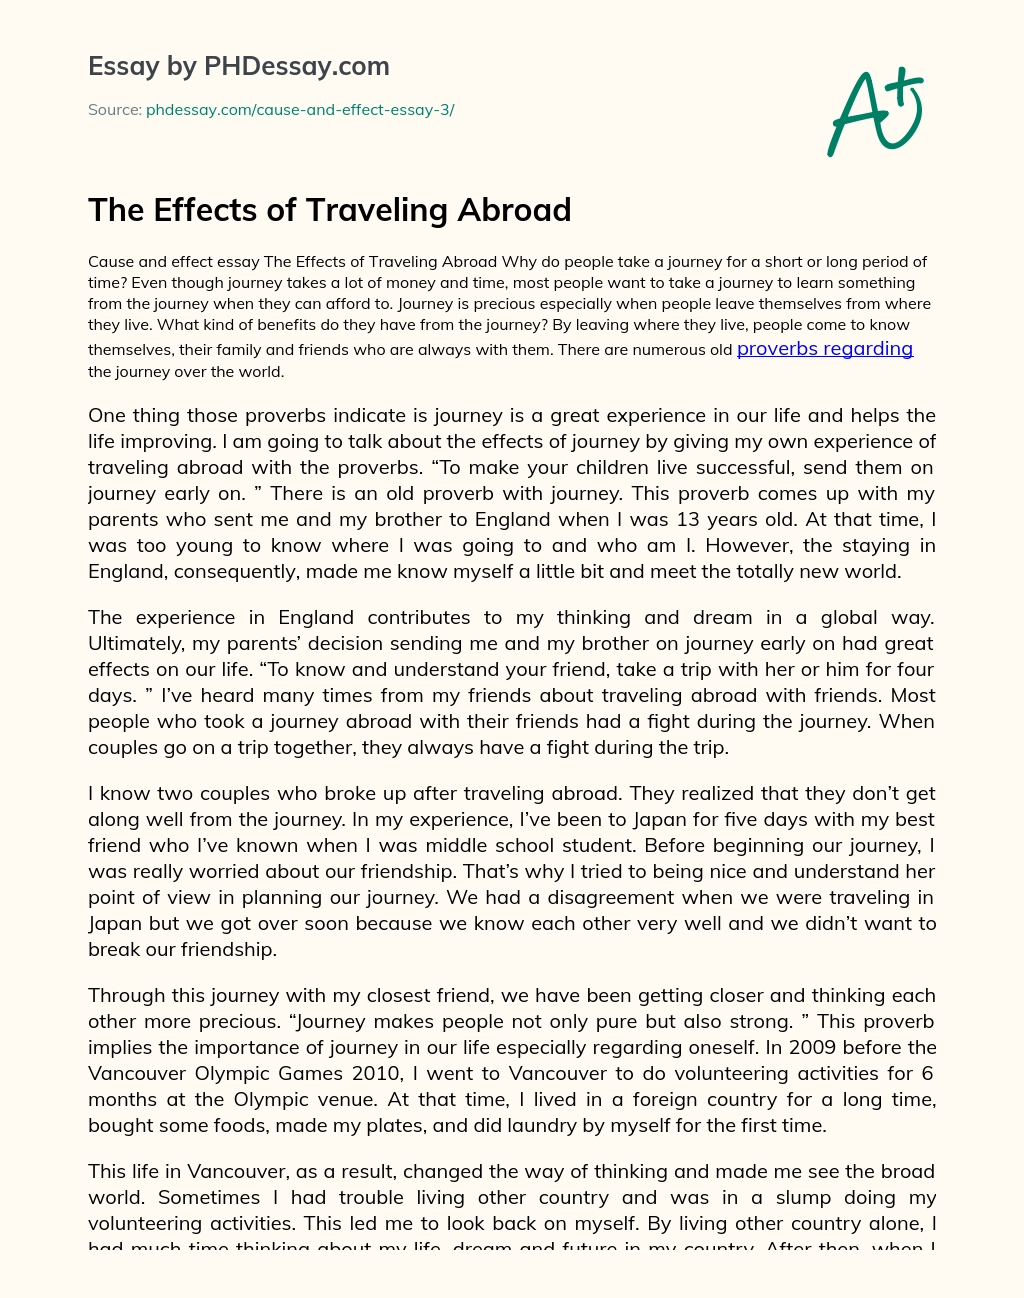 The Effects of Traveling Abroad essay